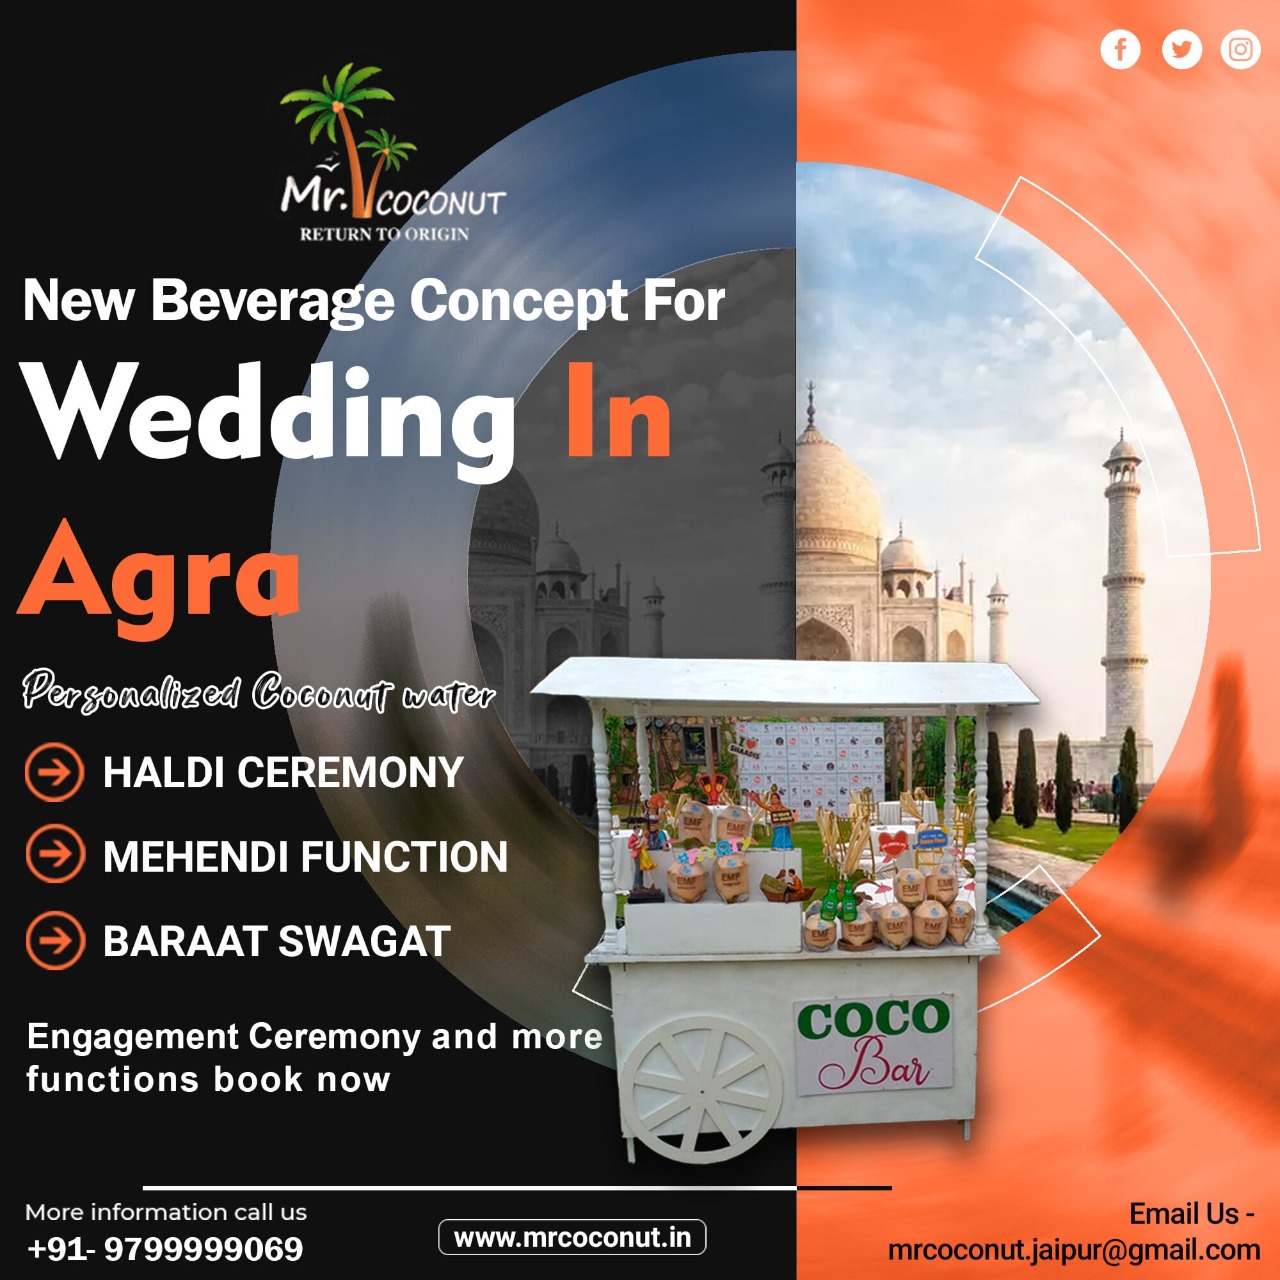 A Grand Wedding at The City of Taj “Agra” with Mr. Coconut